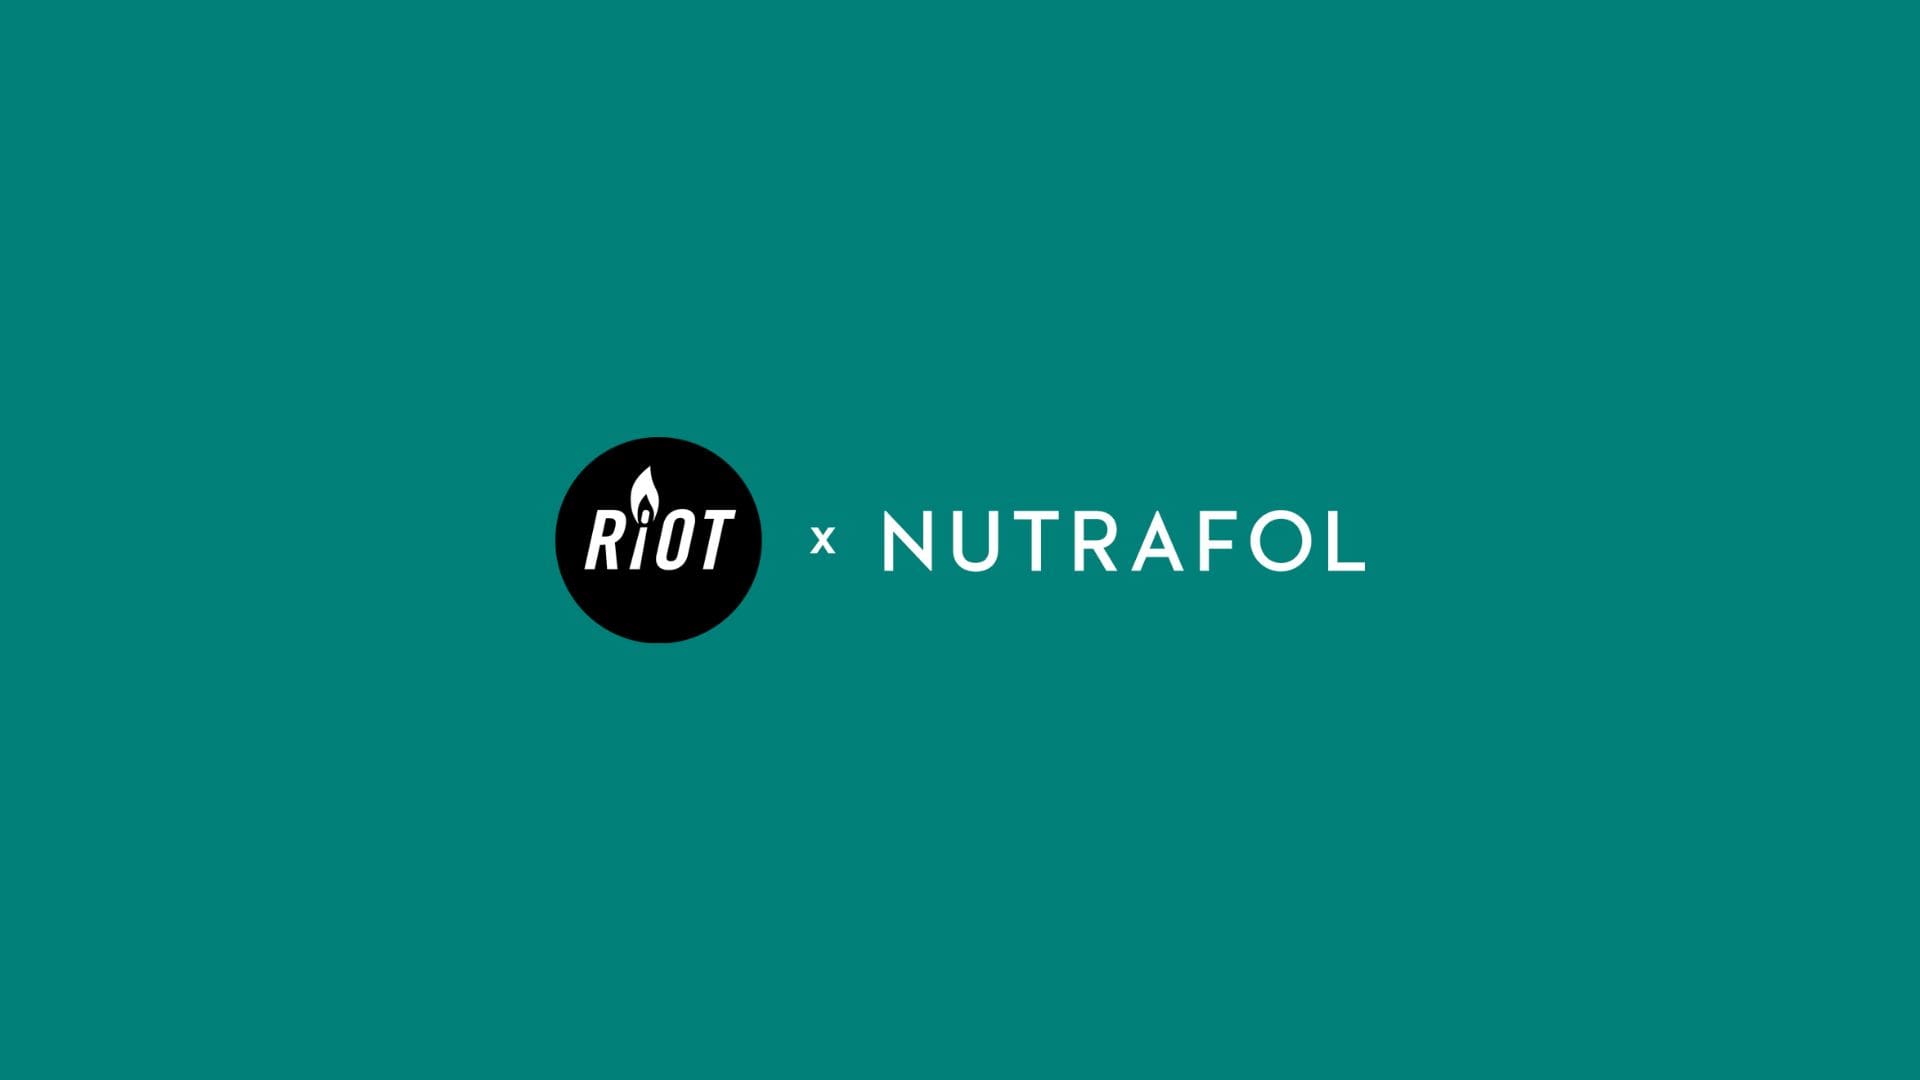 Logo of RIOT x NUTRAFOL collaboration displayed on a teal background, symbolizing the partnership between RIOT creative agency and Nutrafol hair wellness company.